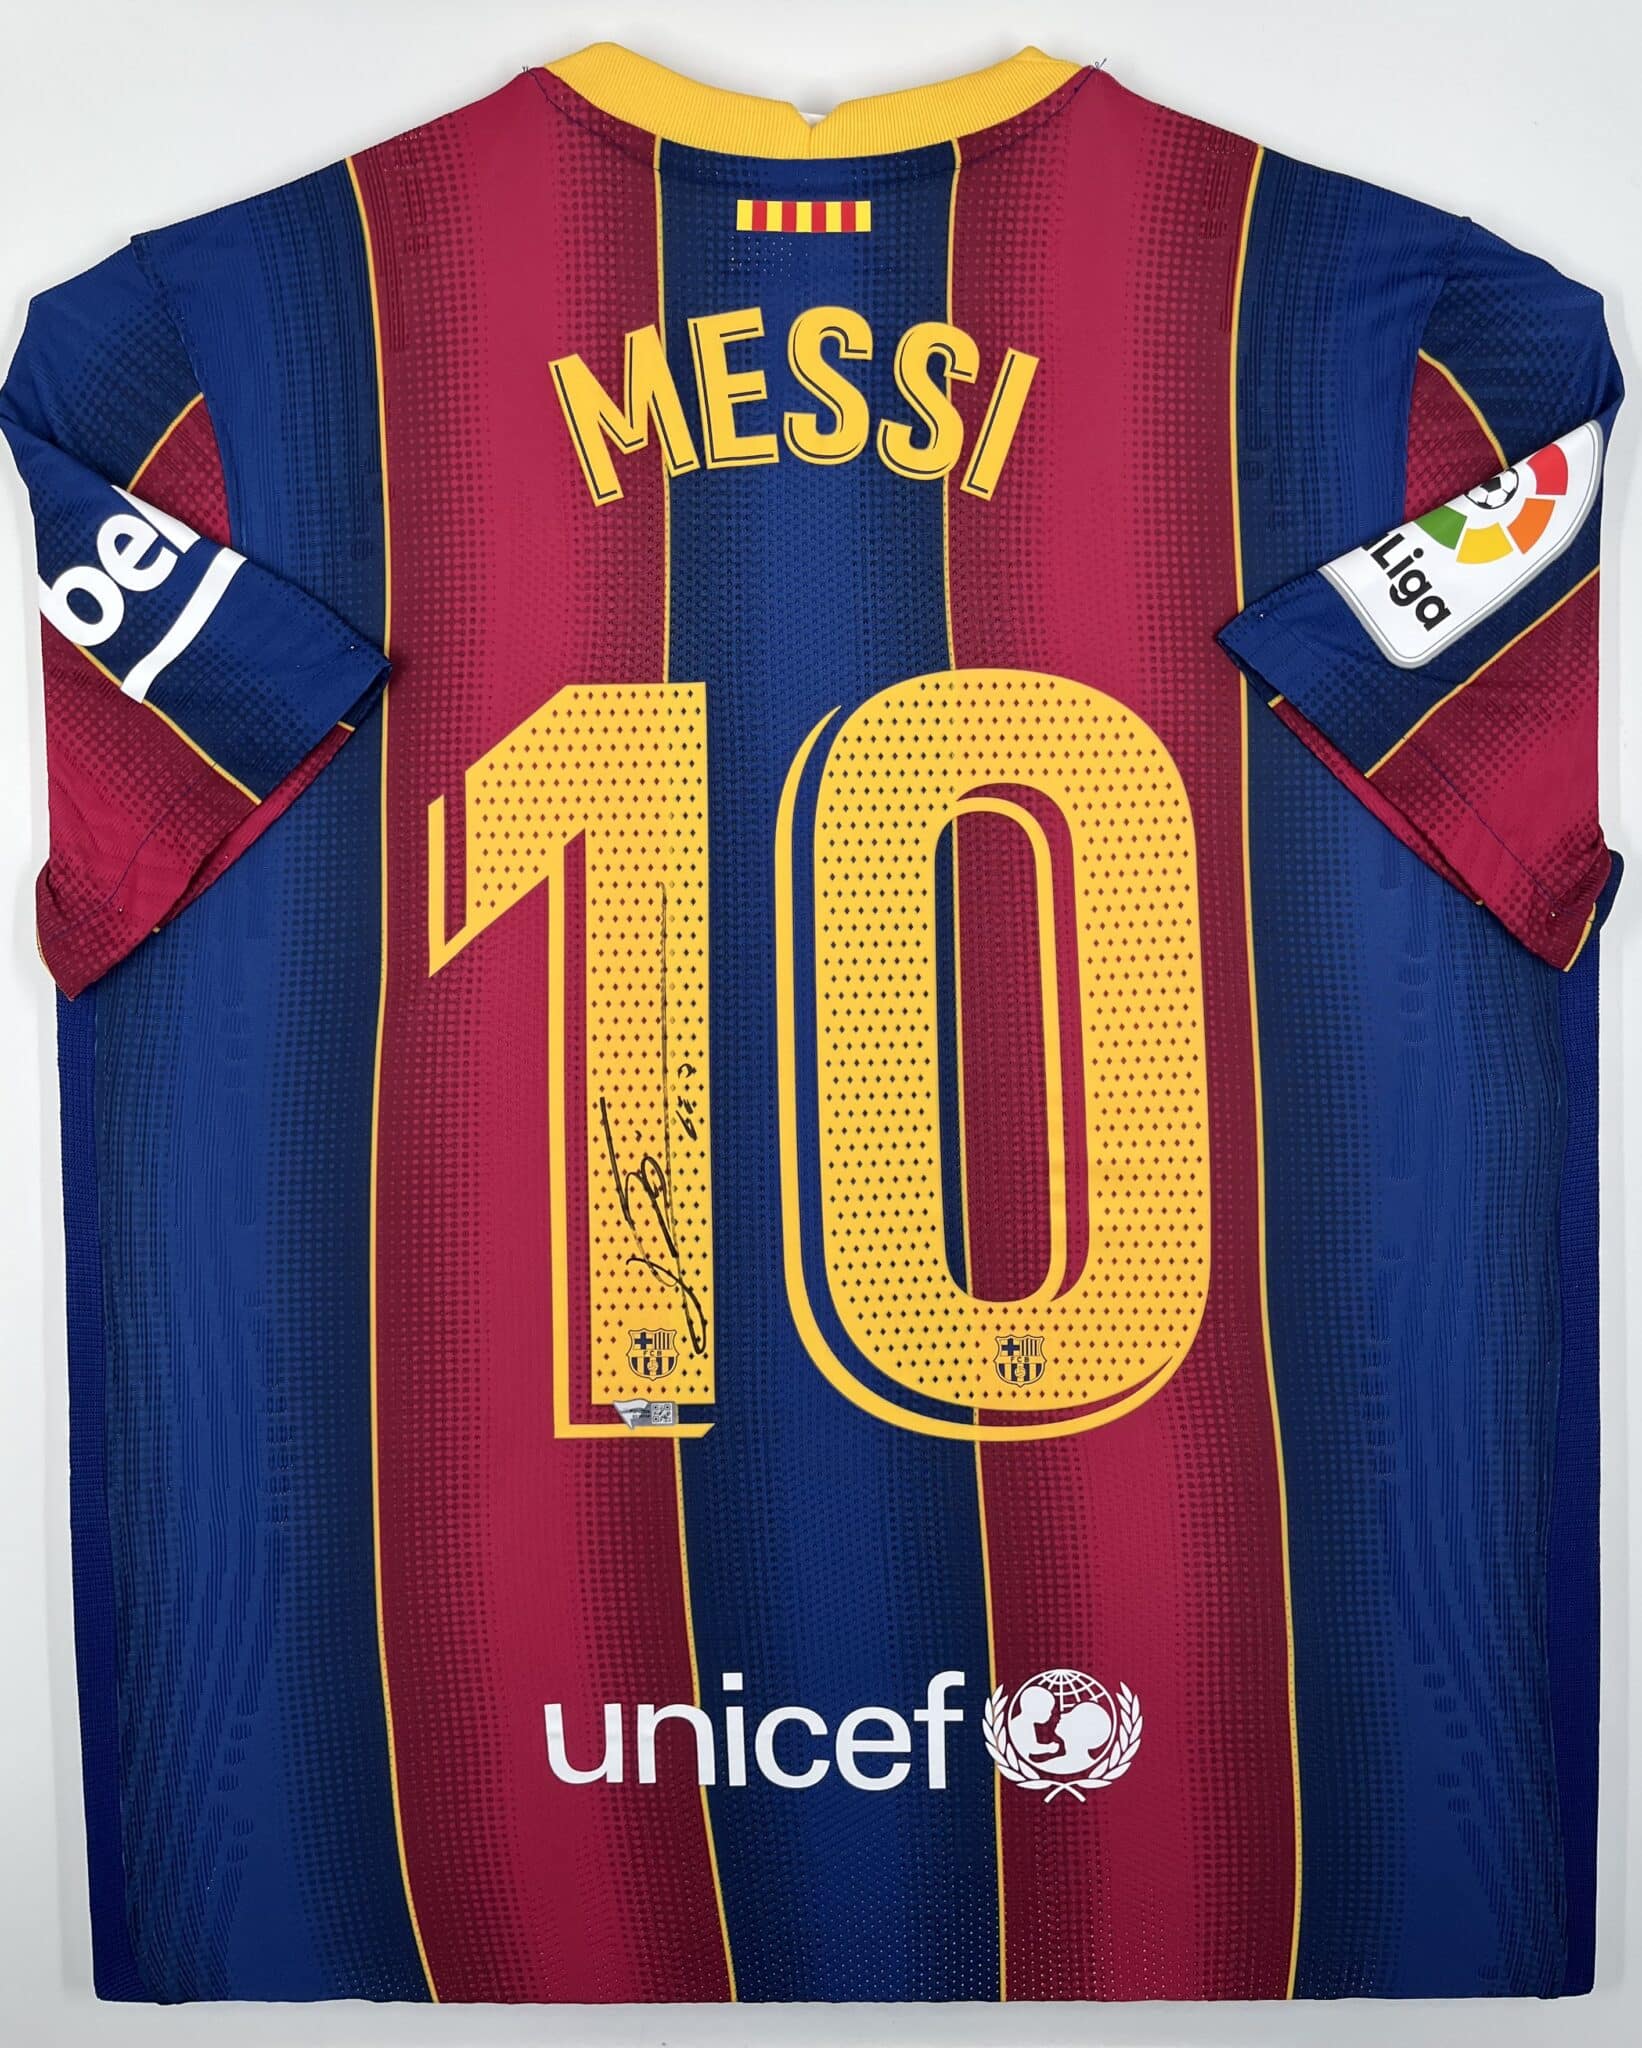 Lionel Messi FC Barcelona Nike Vaporknit Jersey with Signature [B536234]